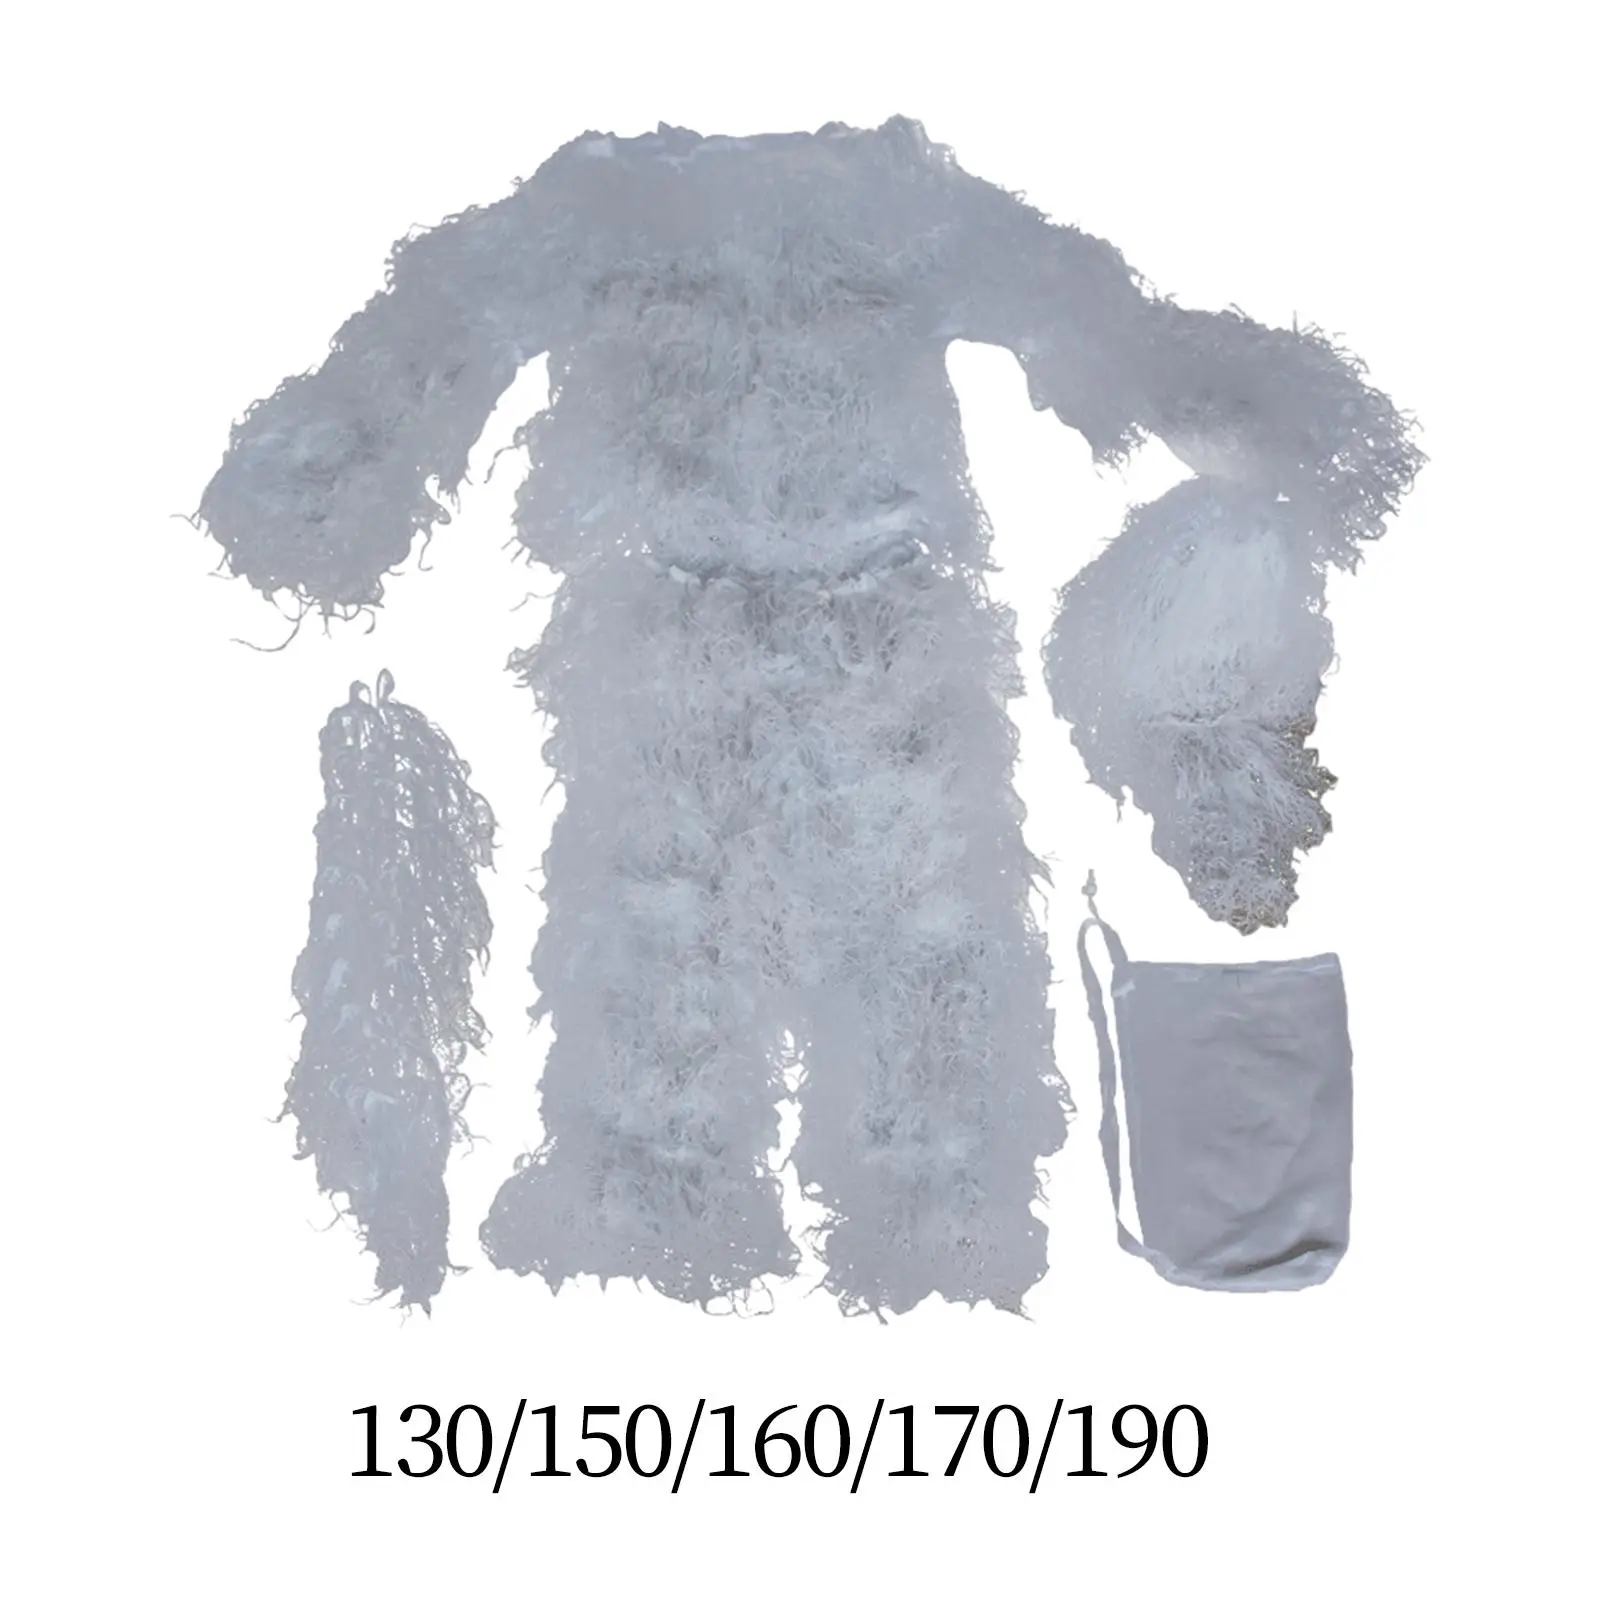 Ghillie Suit Clothes for Snowfield Outdoor Game Bird Watching